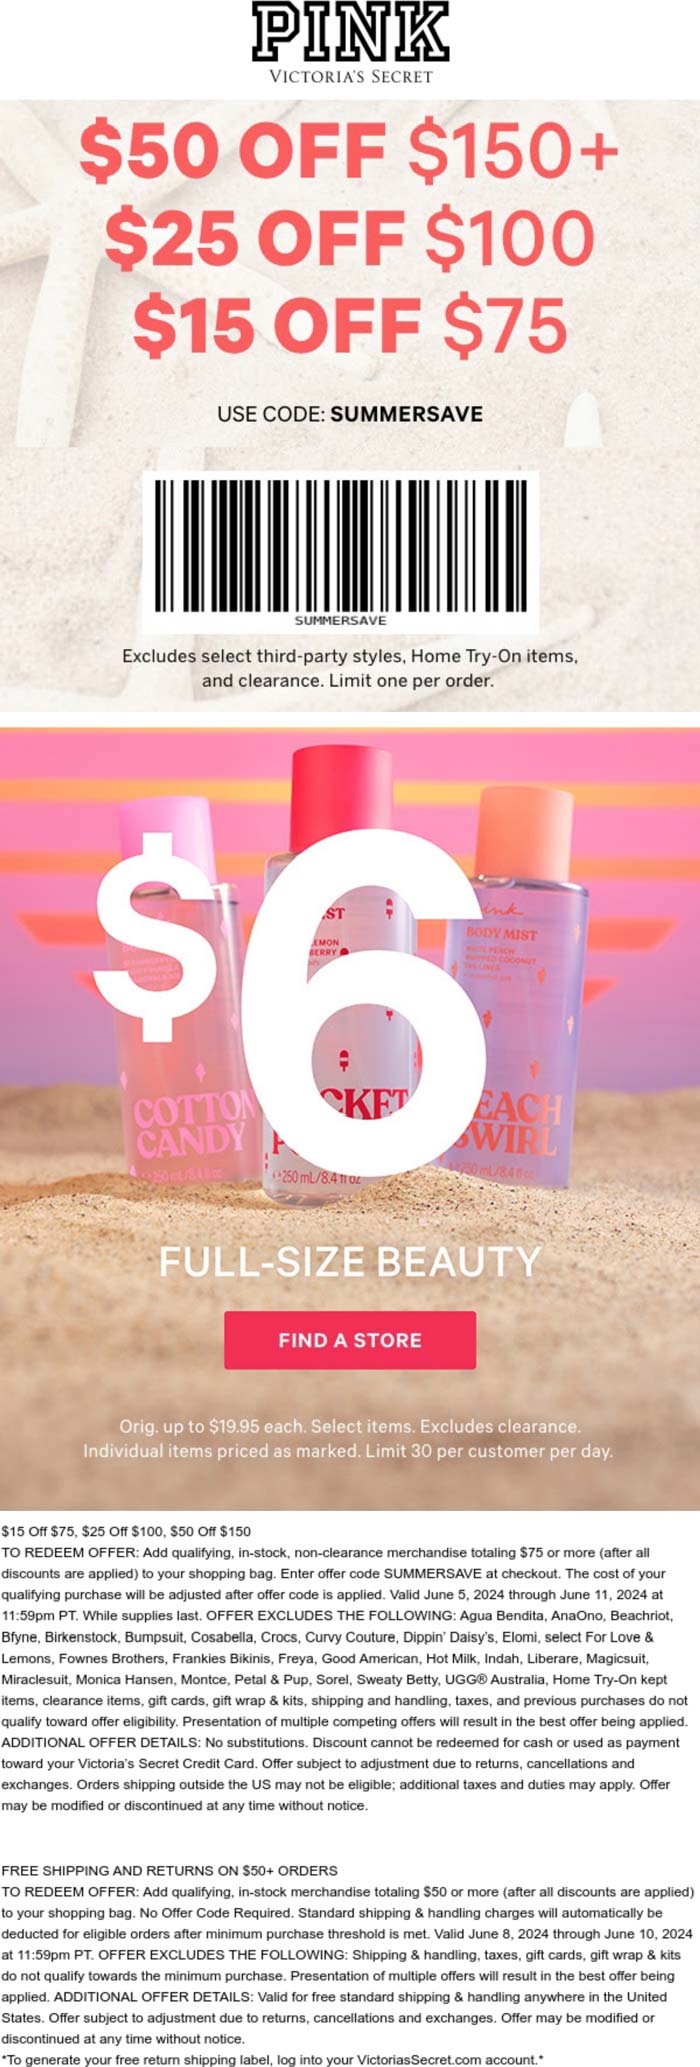 PINK stores Coupon  $15-$50 off $75+ & full size beauty = $6 today at PINK via promo code SUMMERSAVE #pink 